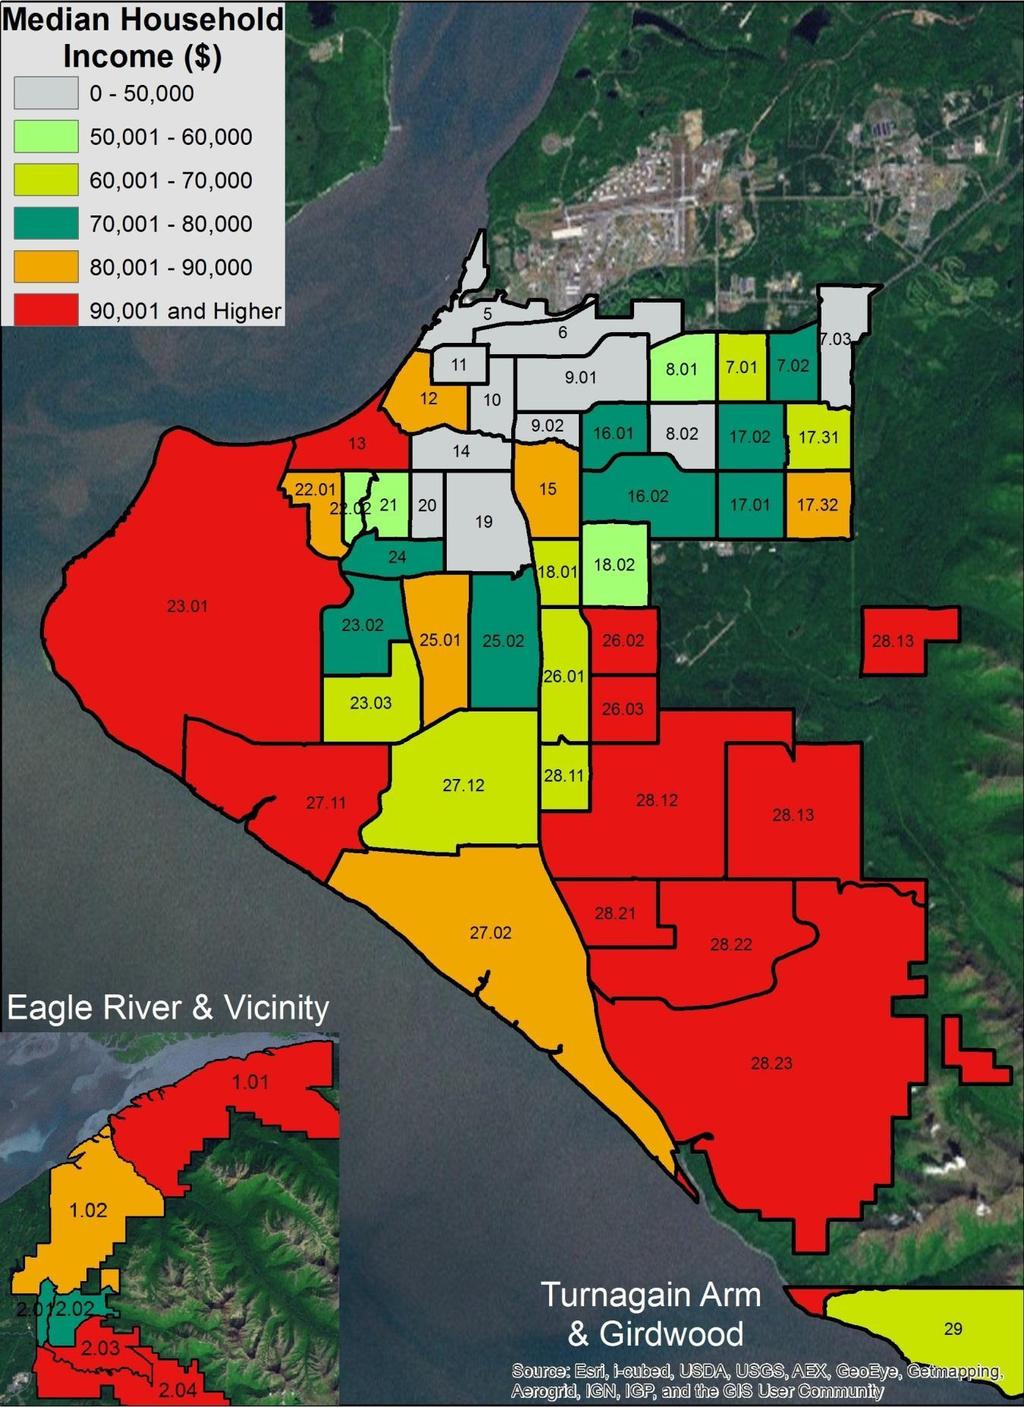 Income: Areas where median